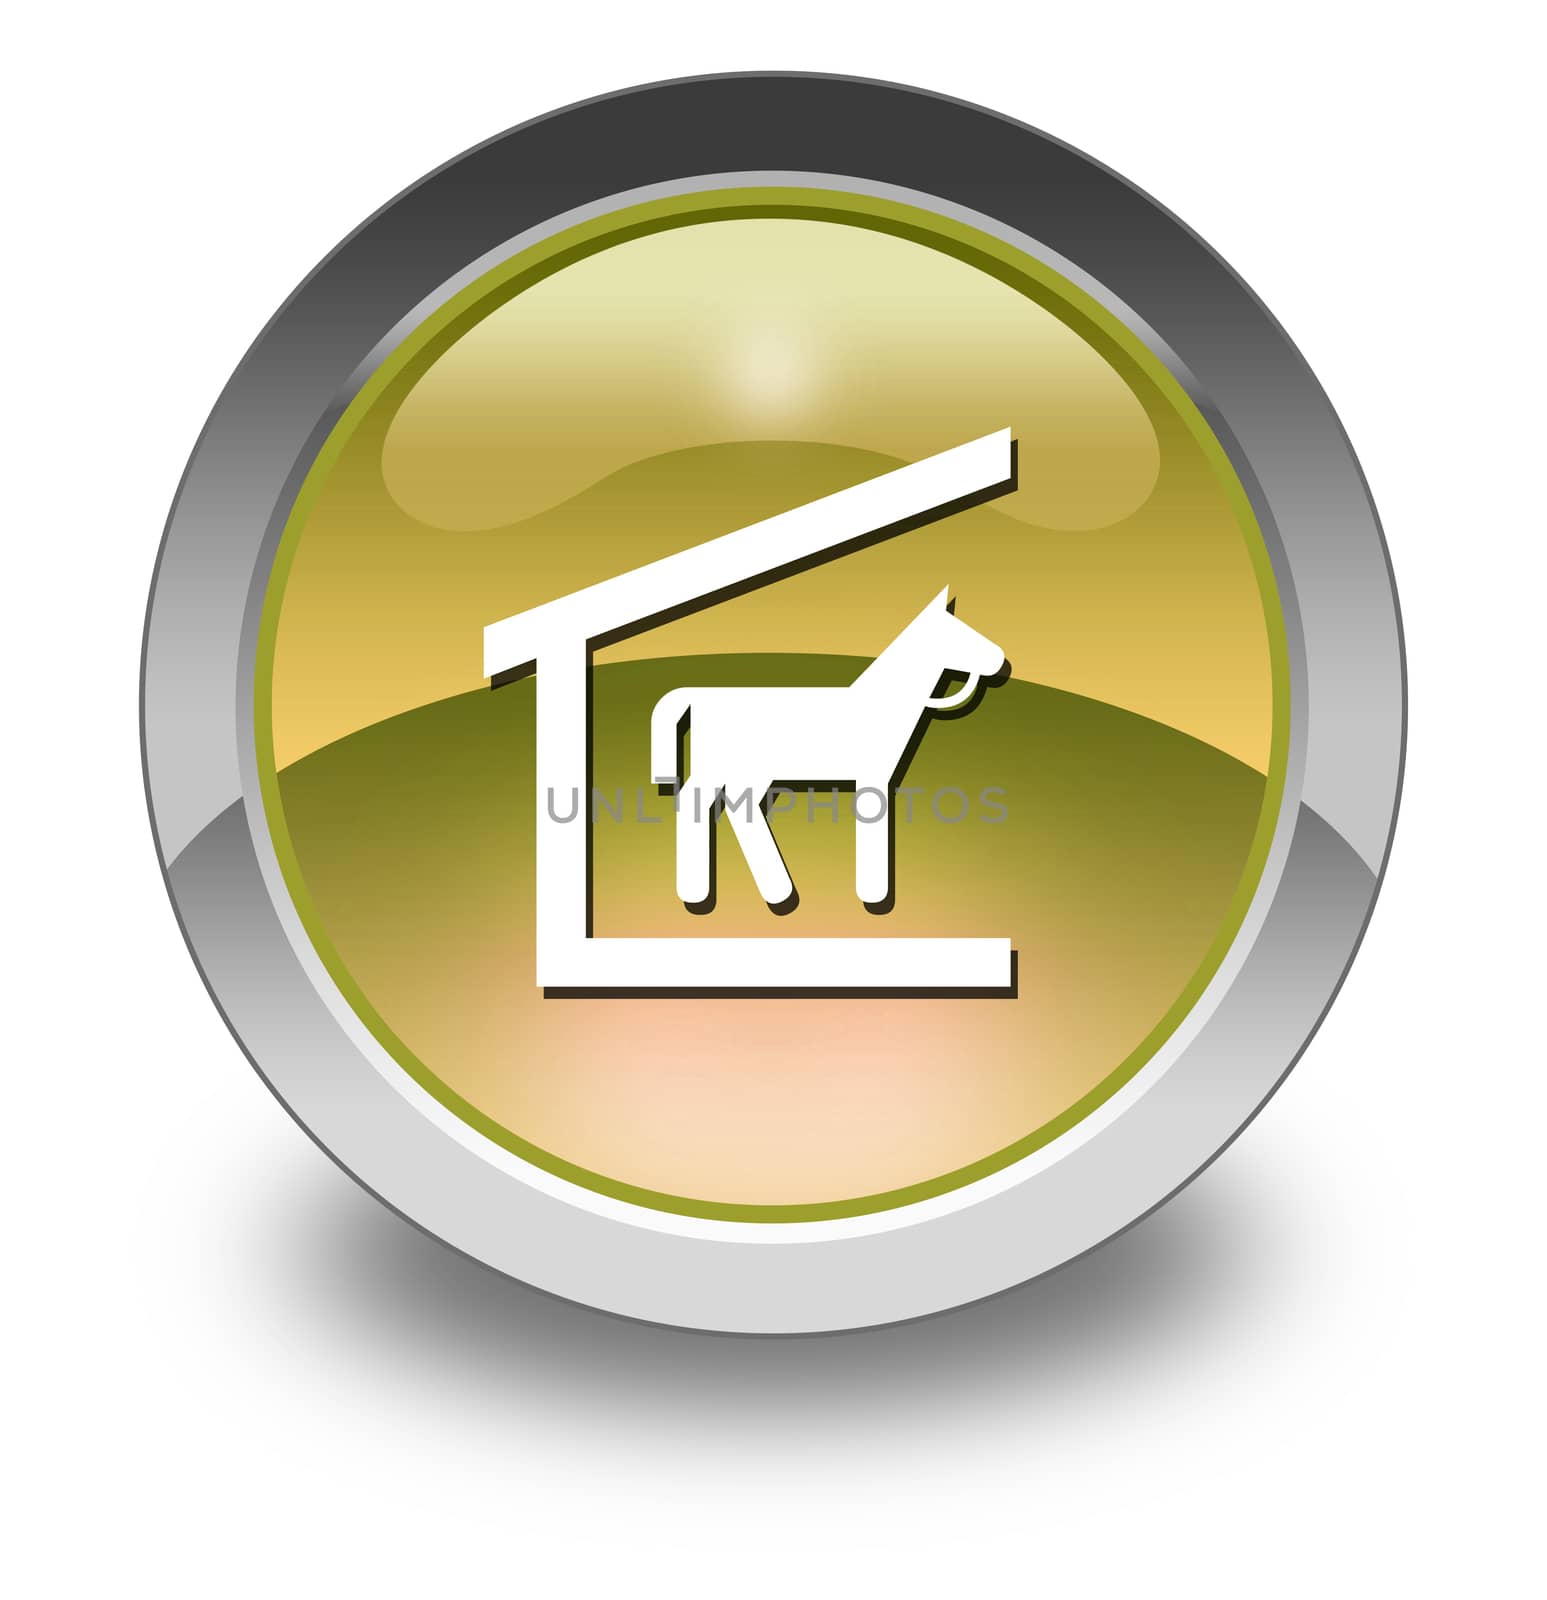 Icon, Button, Pictogram with Stable symbol